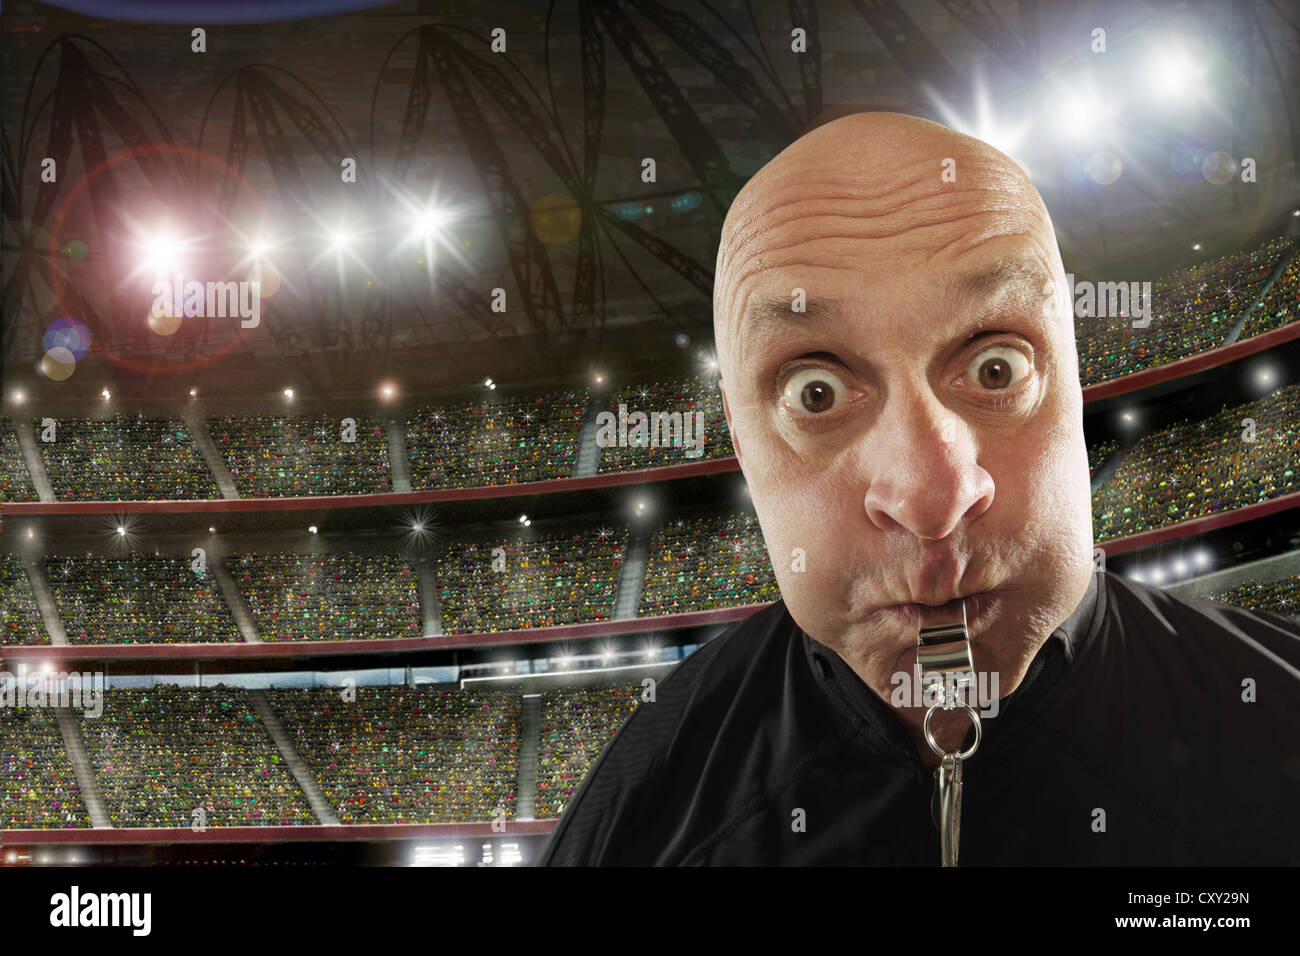 Referee with a whistle, soccer stadium Stock Photo